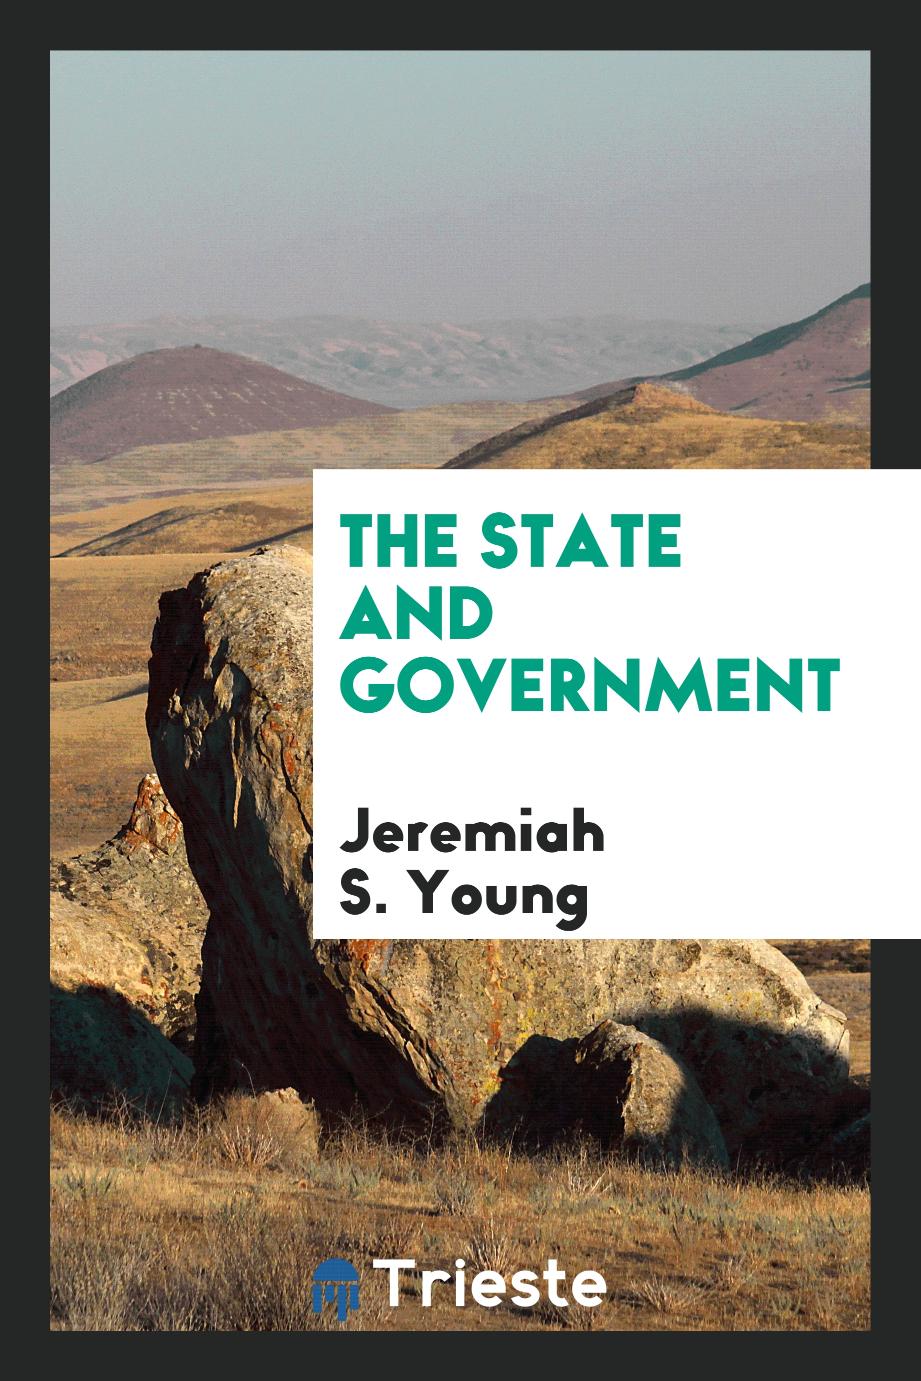 The state and government